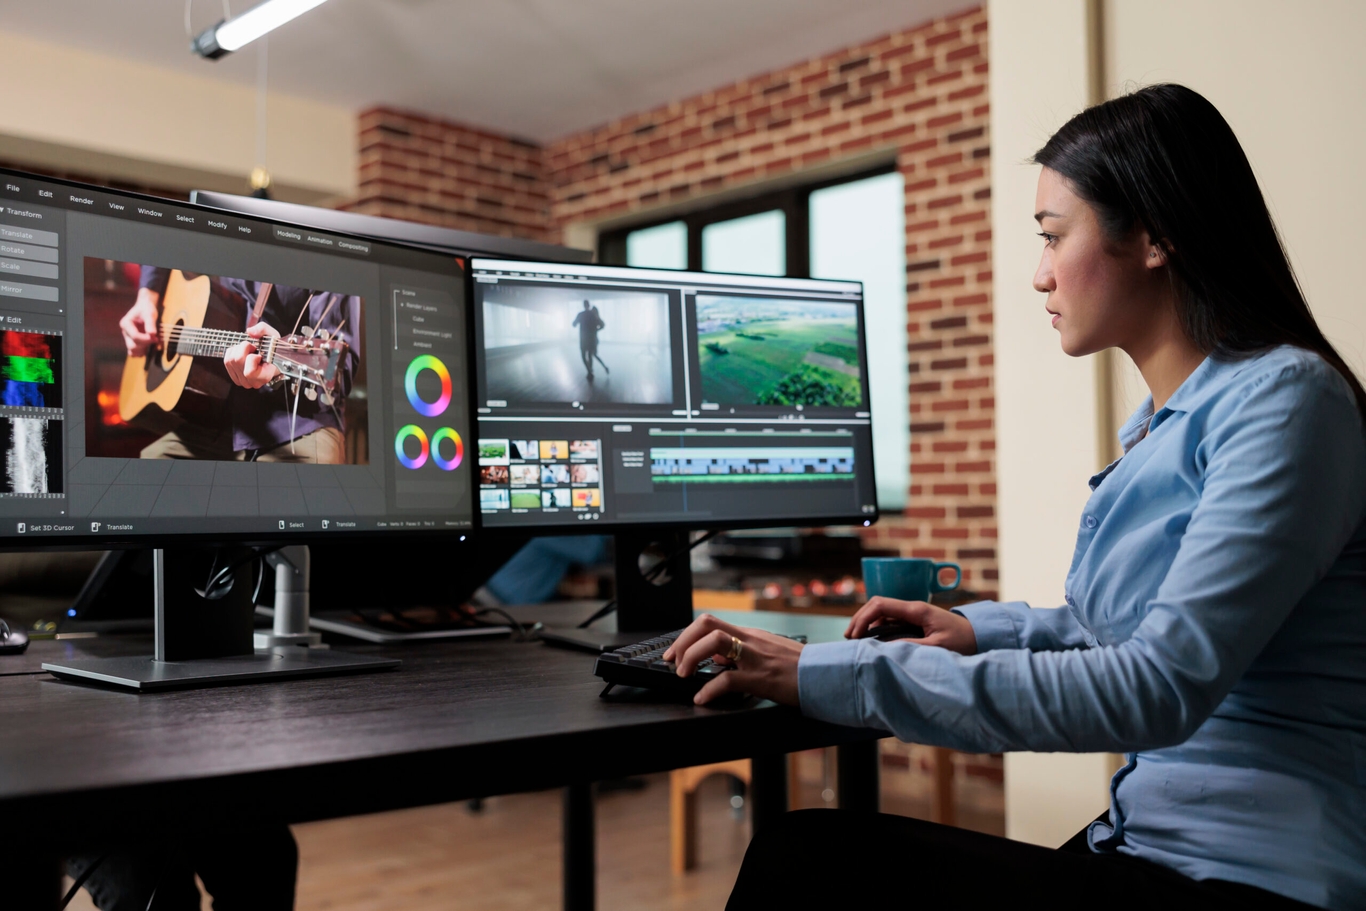 adobe premiere pro system requirements in virtualization